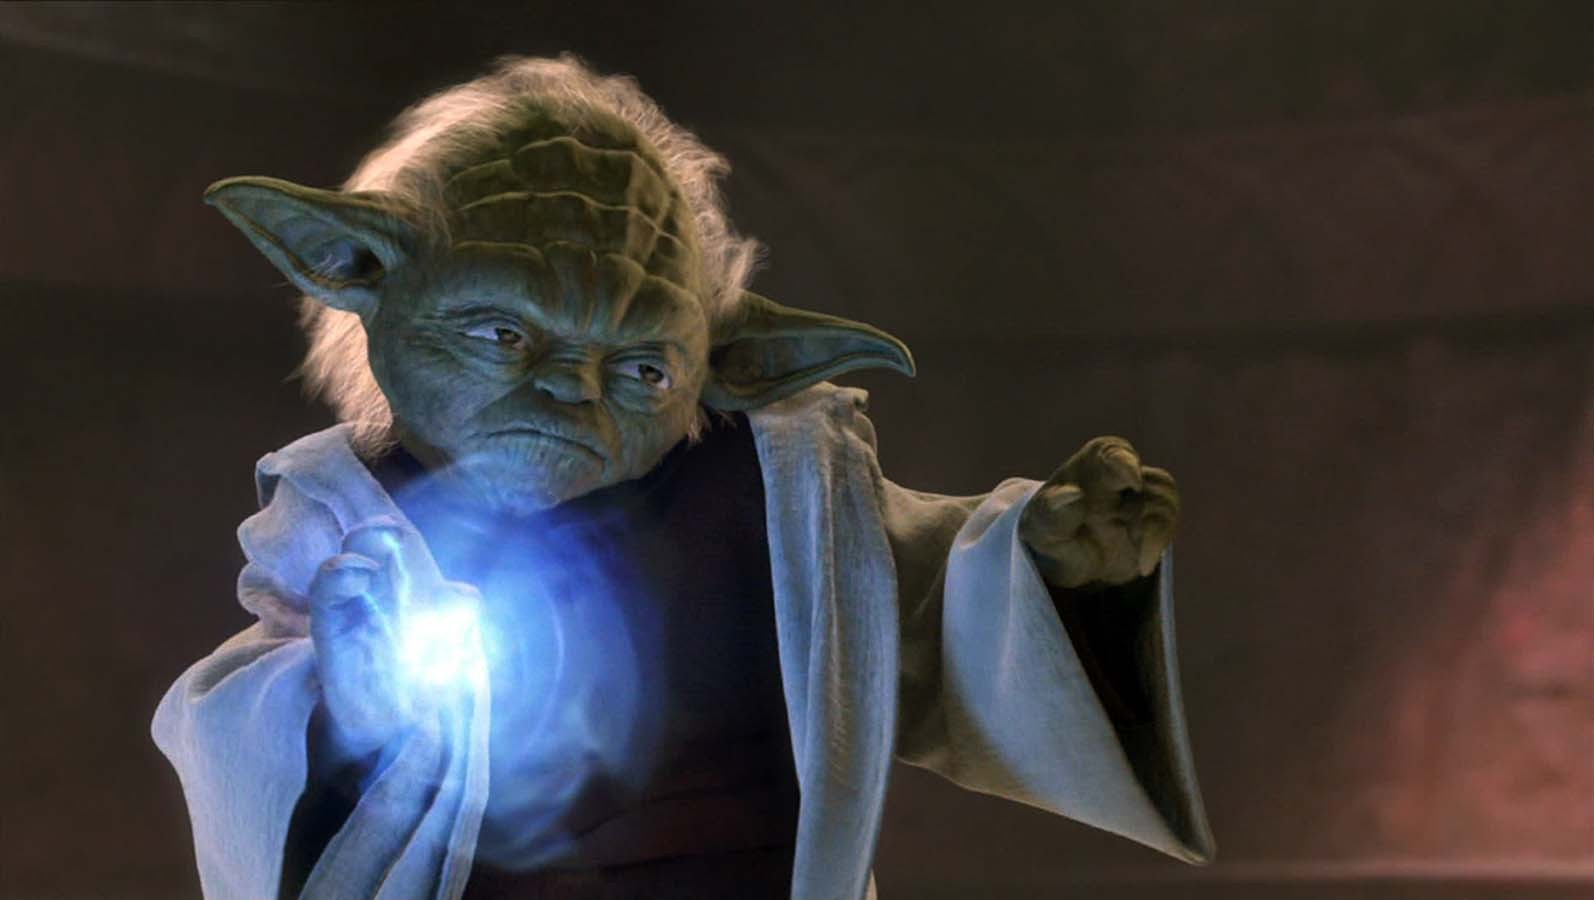 Yoda Star Wars Jedi Star Wars Episode Ii The Attack Of The Clones Force Lightning 1594x900